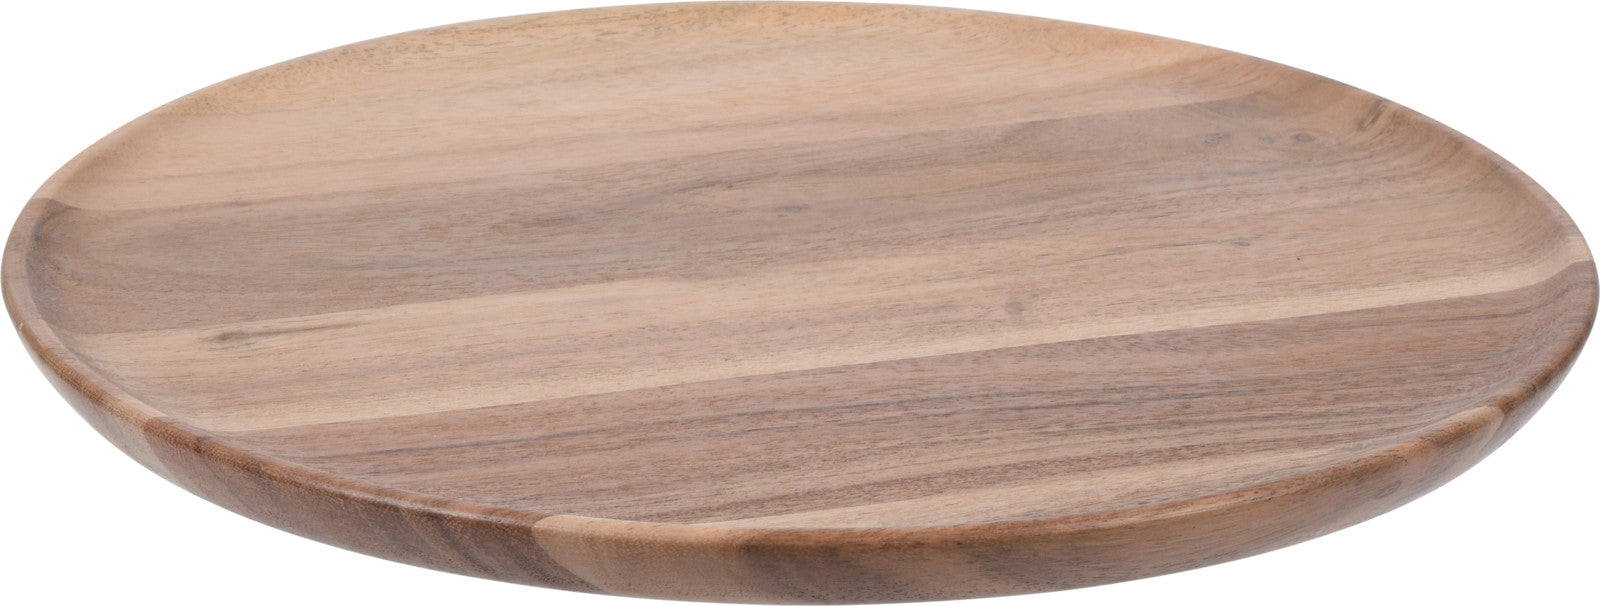 Candle Plate Round Acacia Wood 280mm